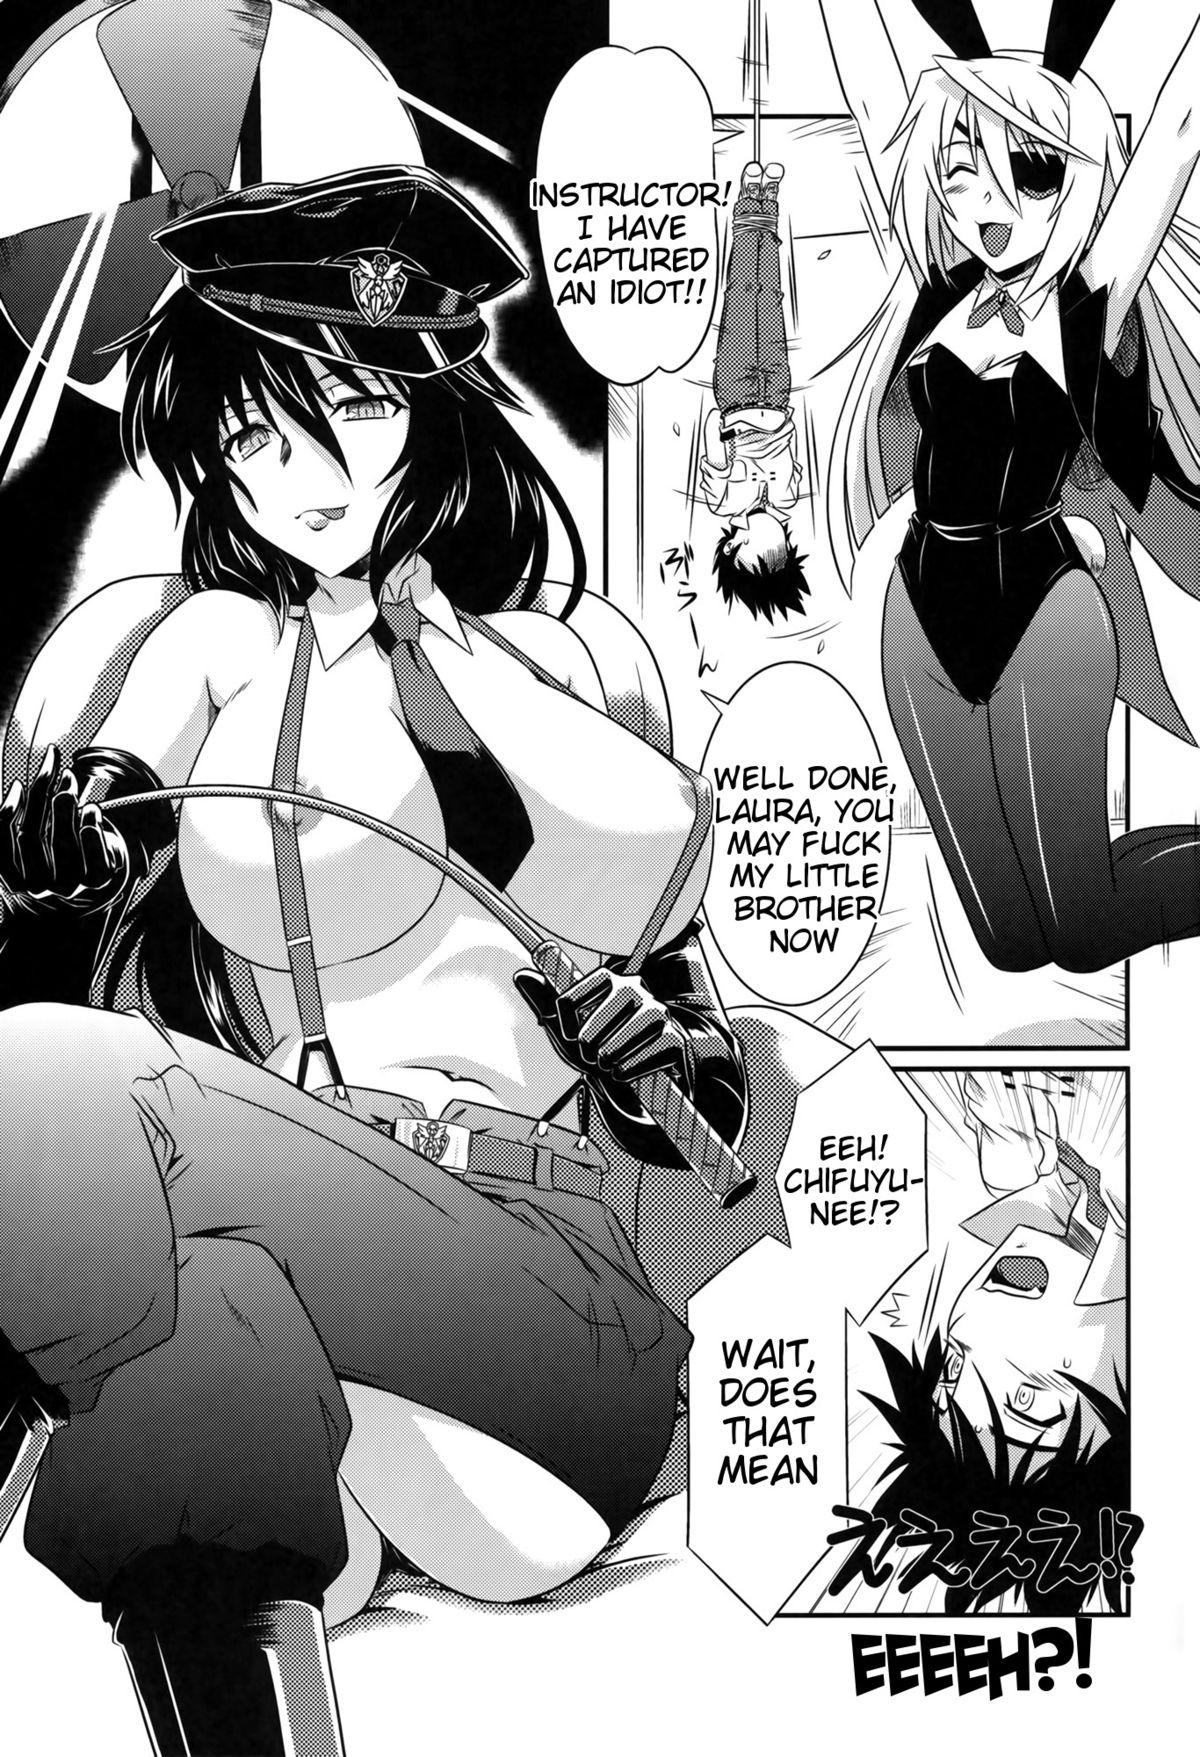 Humiliation Pov is Incest Strategy 4 - Infinite stratos Juggs - Page 5